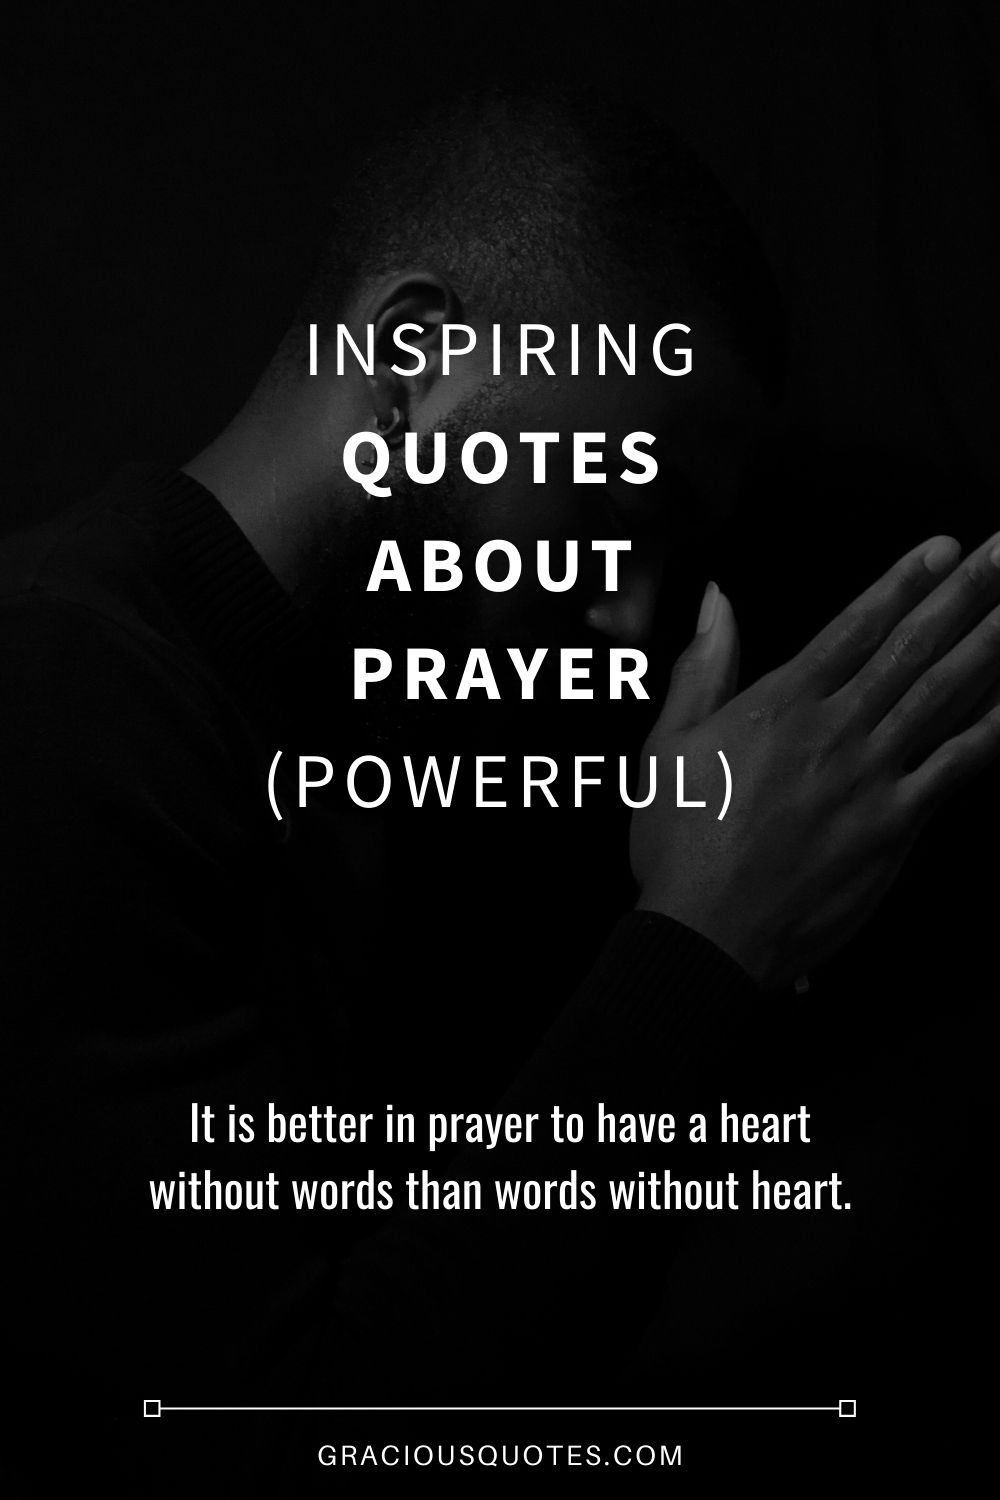 Inspiring Quotes About Prayer (POWERFUL) - Gracious Quotes